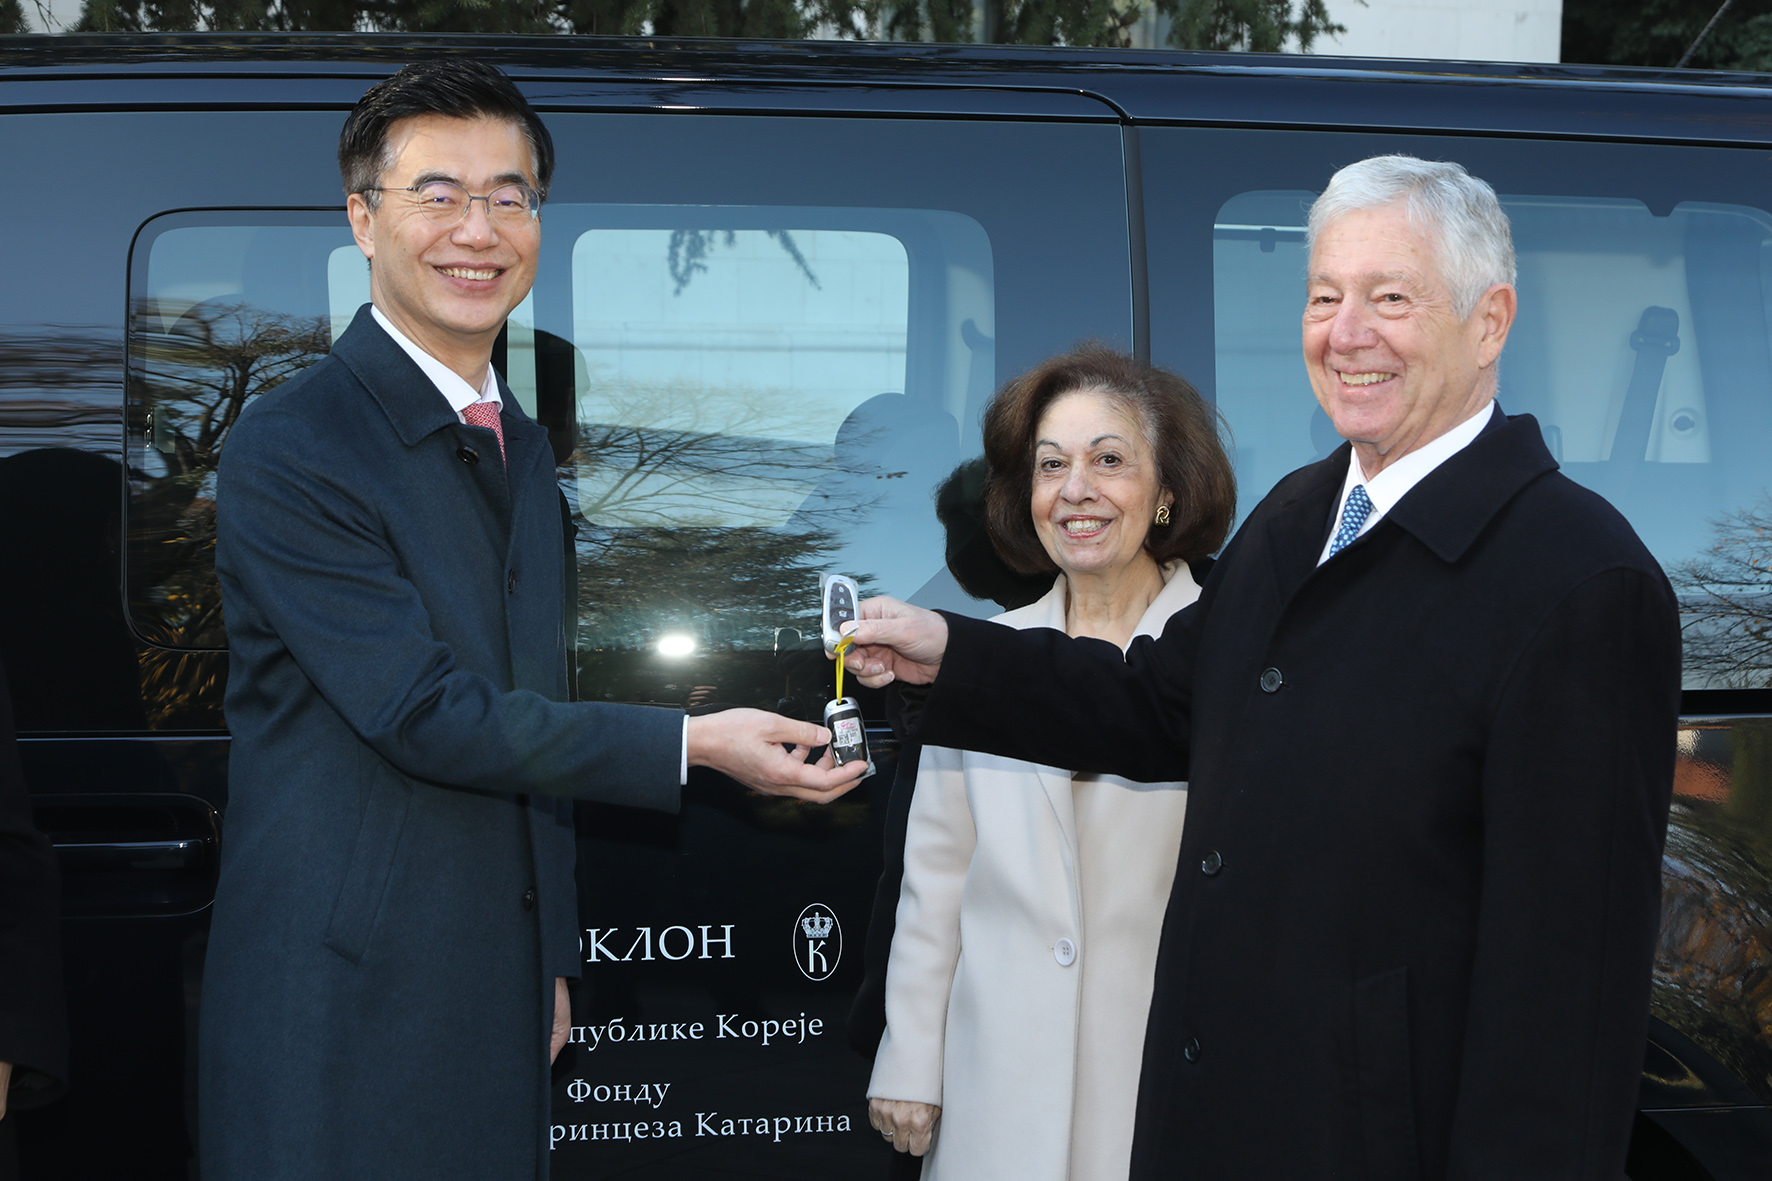 REPUBLIC OF KOREA AND CROWN PRINCESS DELIVER AID TO SERBIAN HOSPITALS